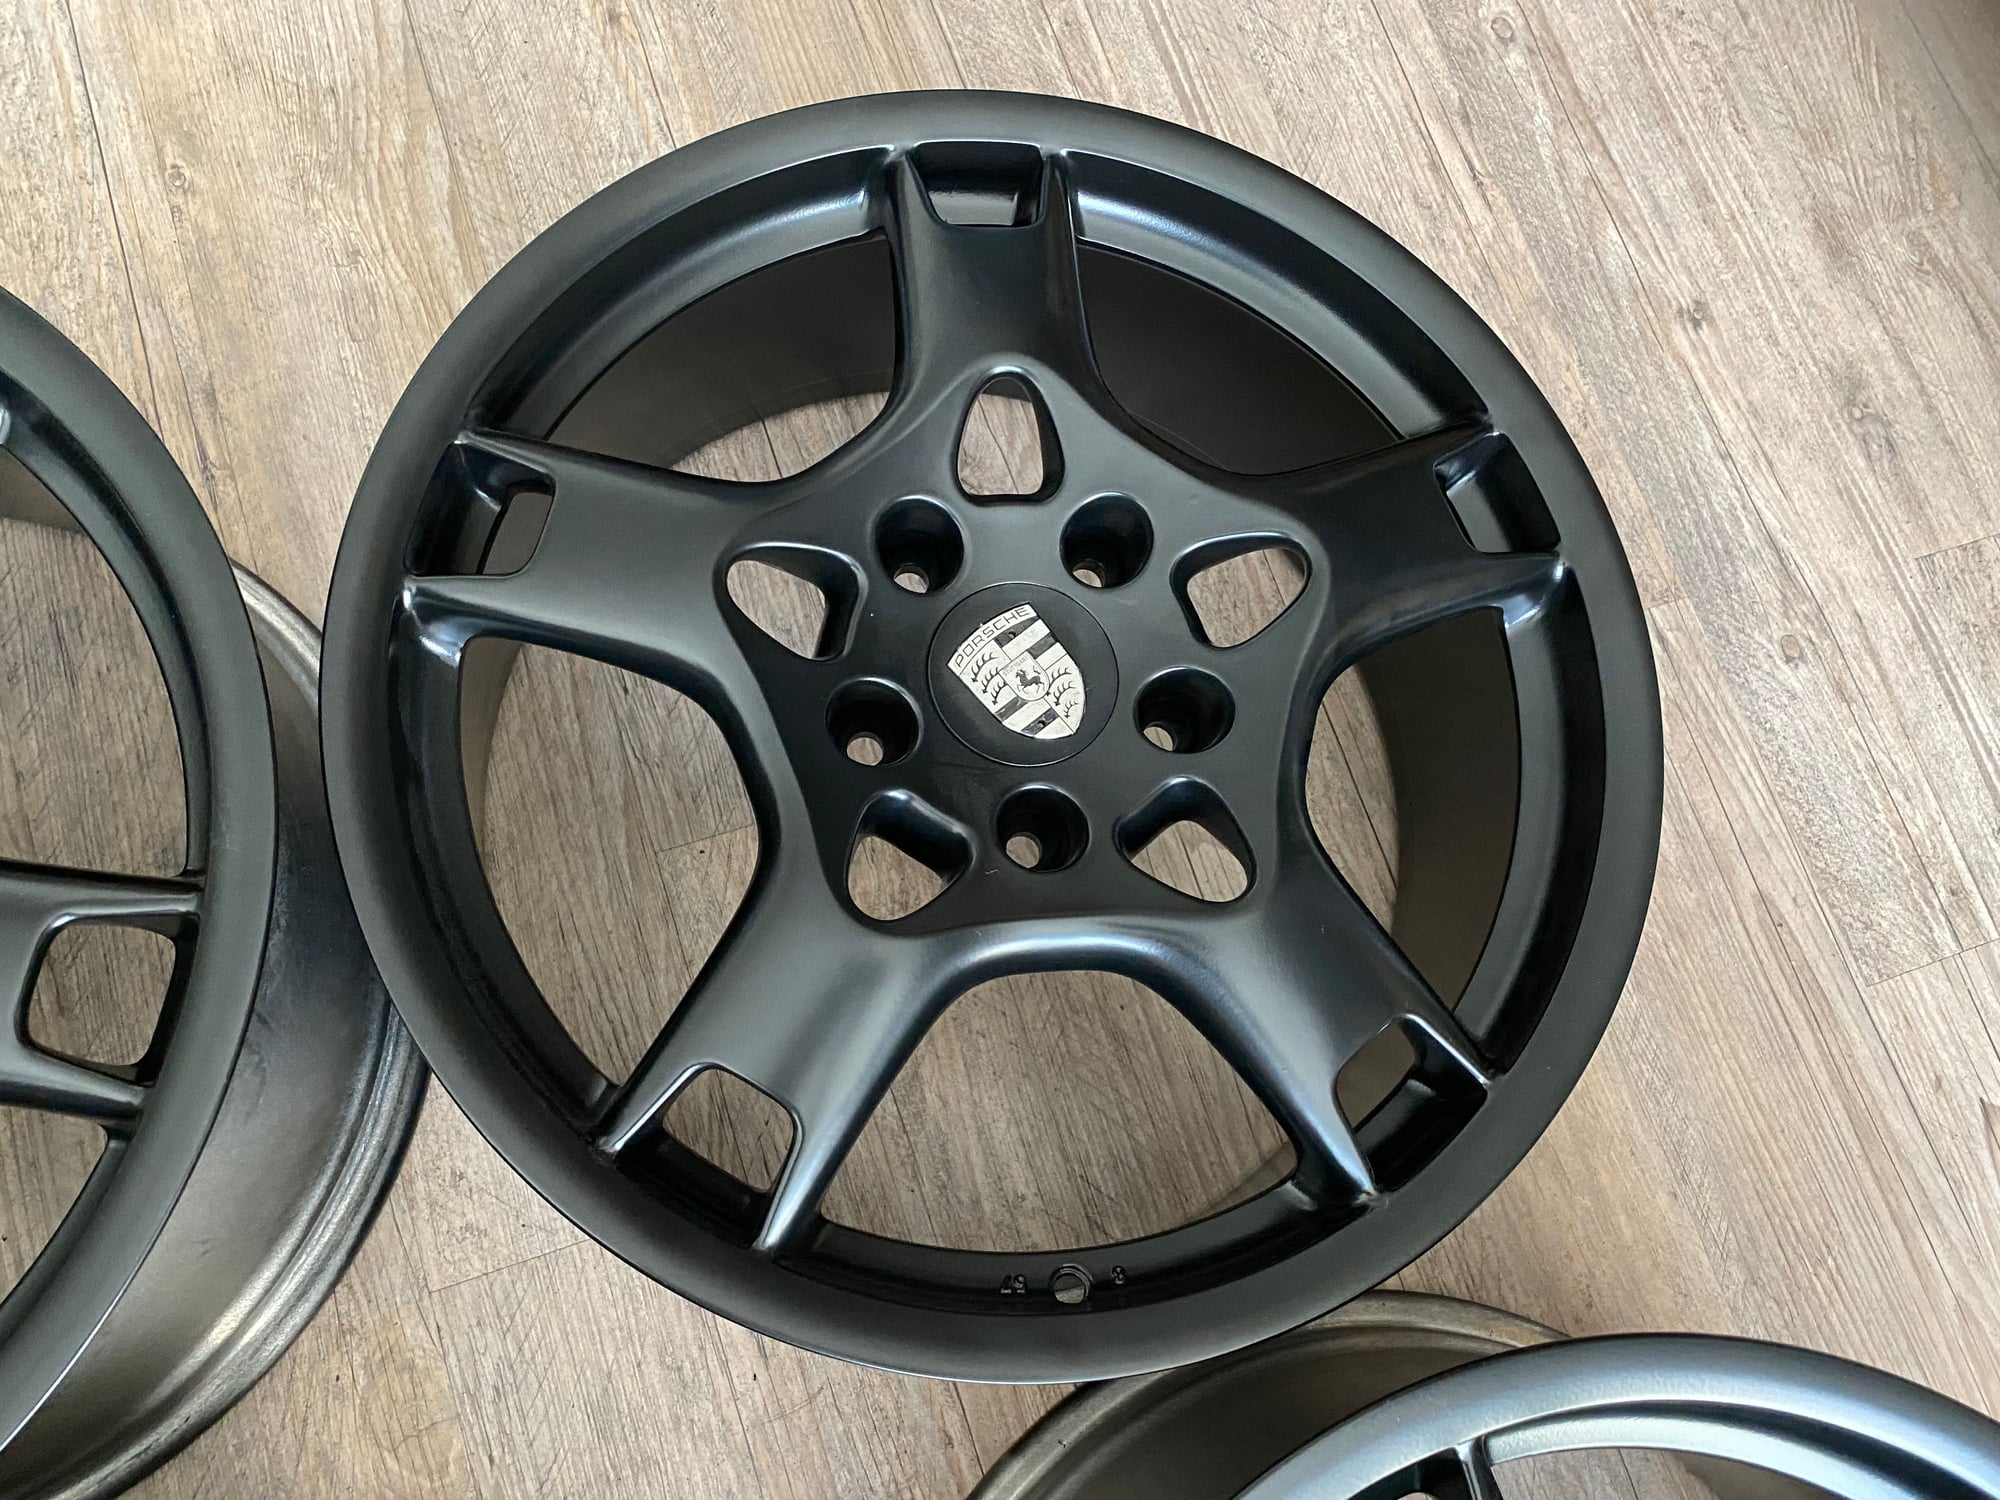 Wheels and Tires/Axles - Porsche 987/997 Black OEM Lobster Claw Wheels Set of 4 19" Satin Black - Used - Dallas, TX 75231, United States